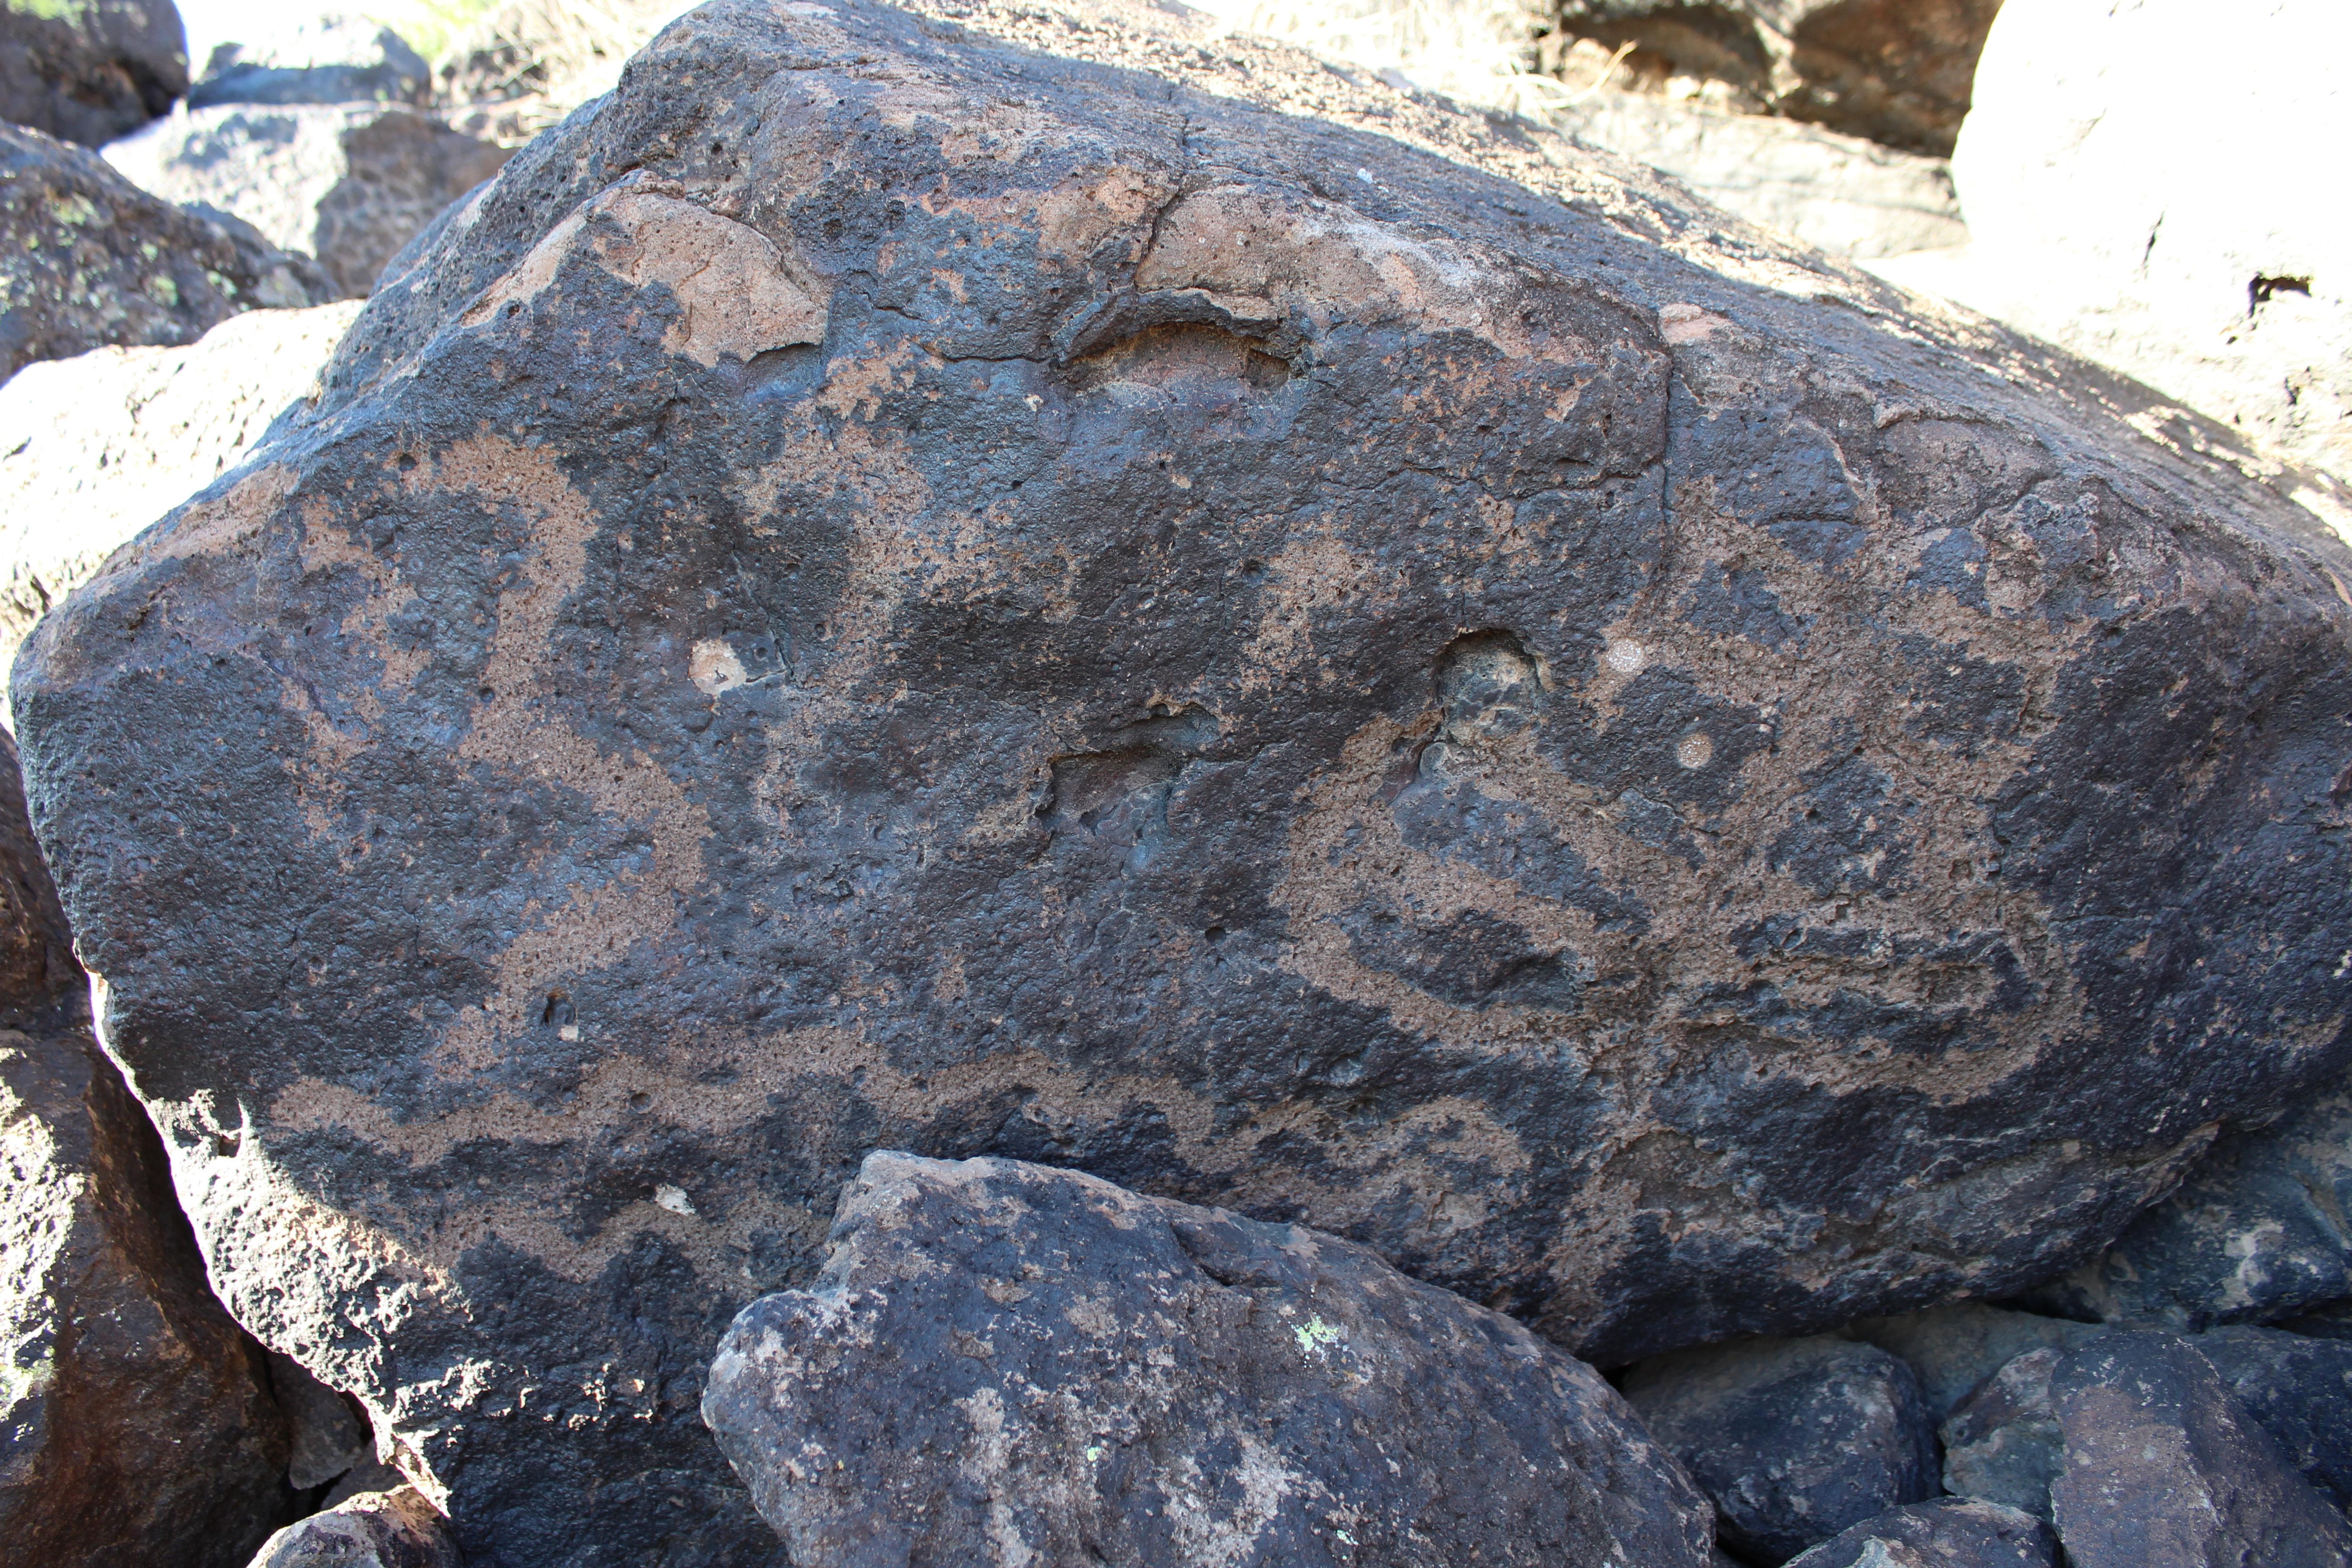 photo of the petroglyph in question